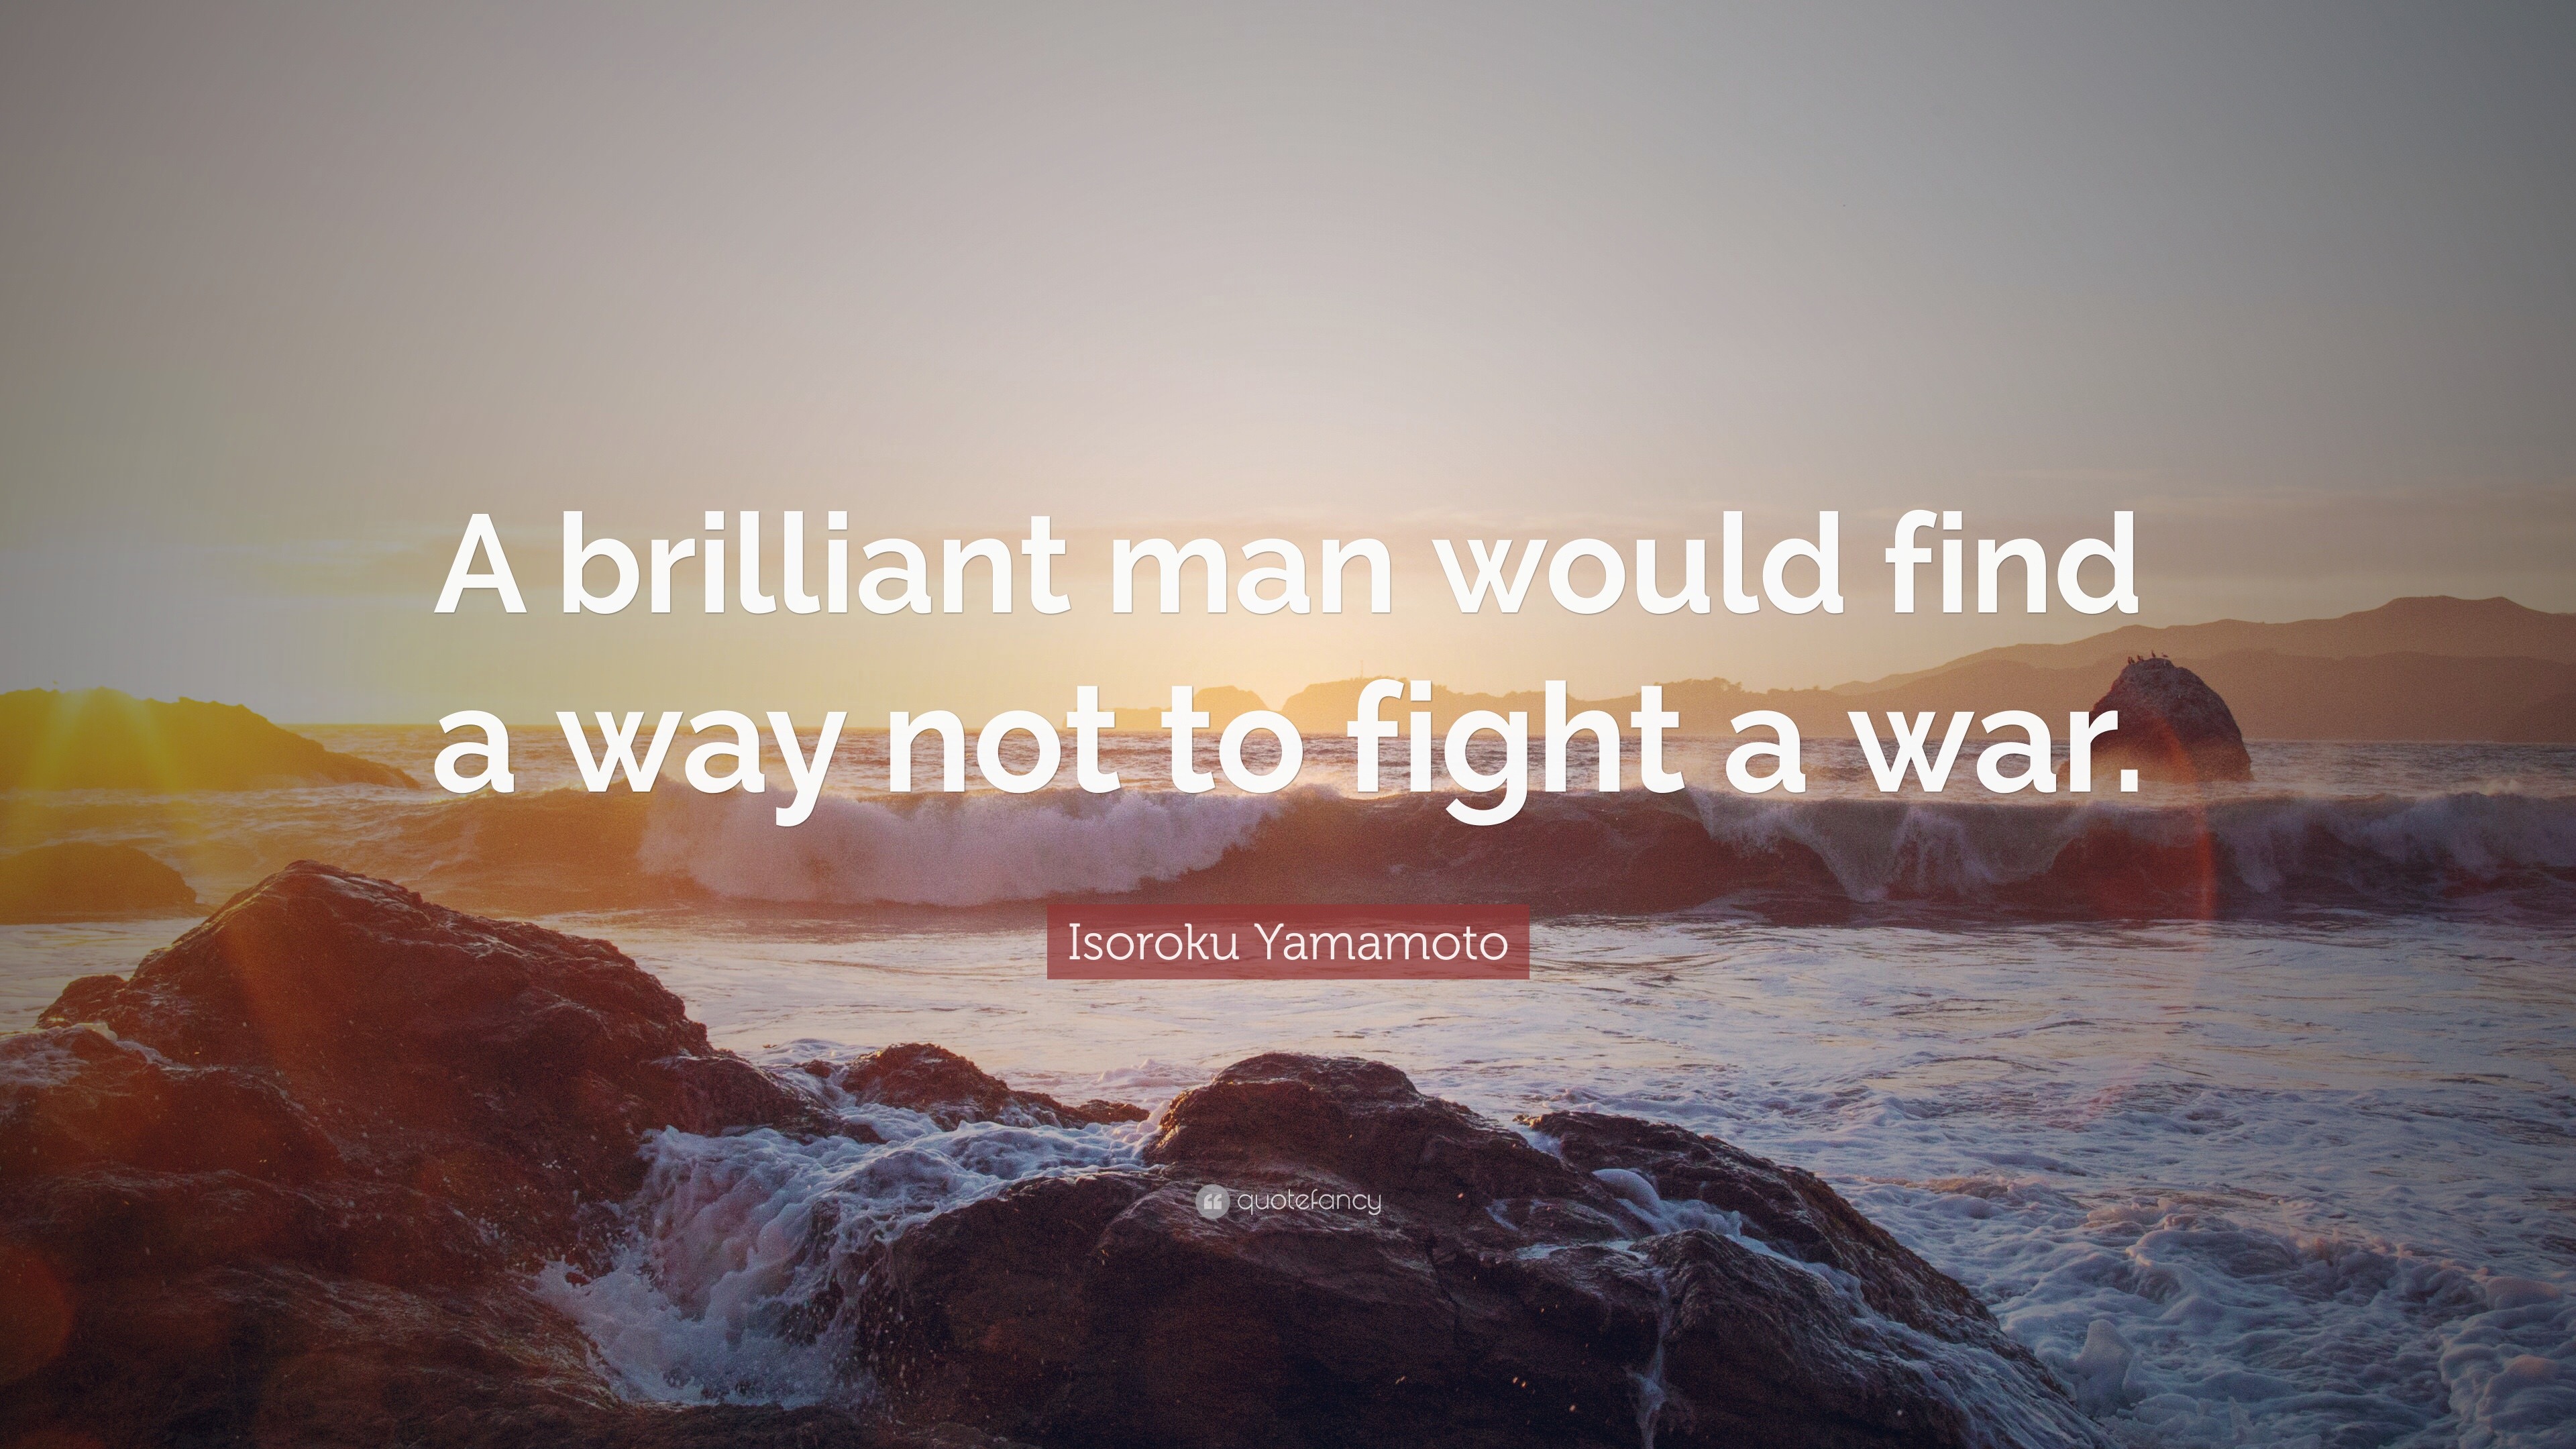 Isoroku Yamamoto Quote: “A brilliant man would find a way not to